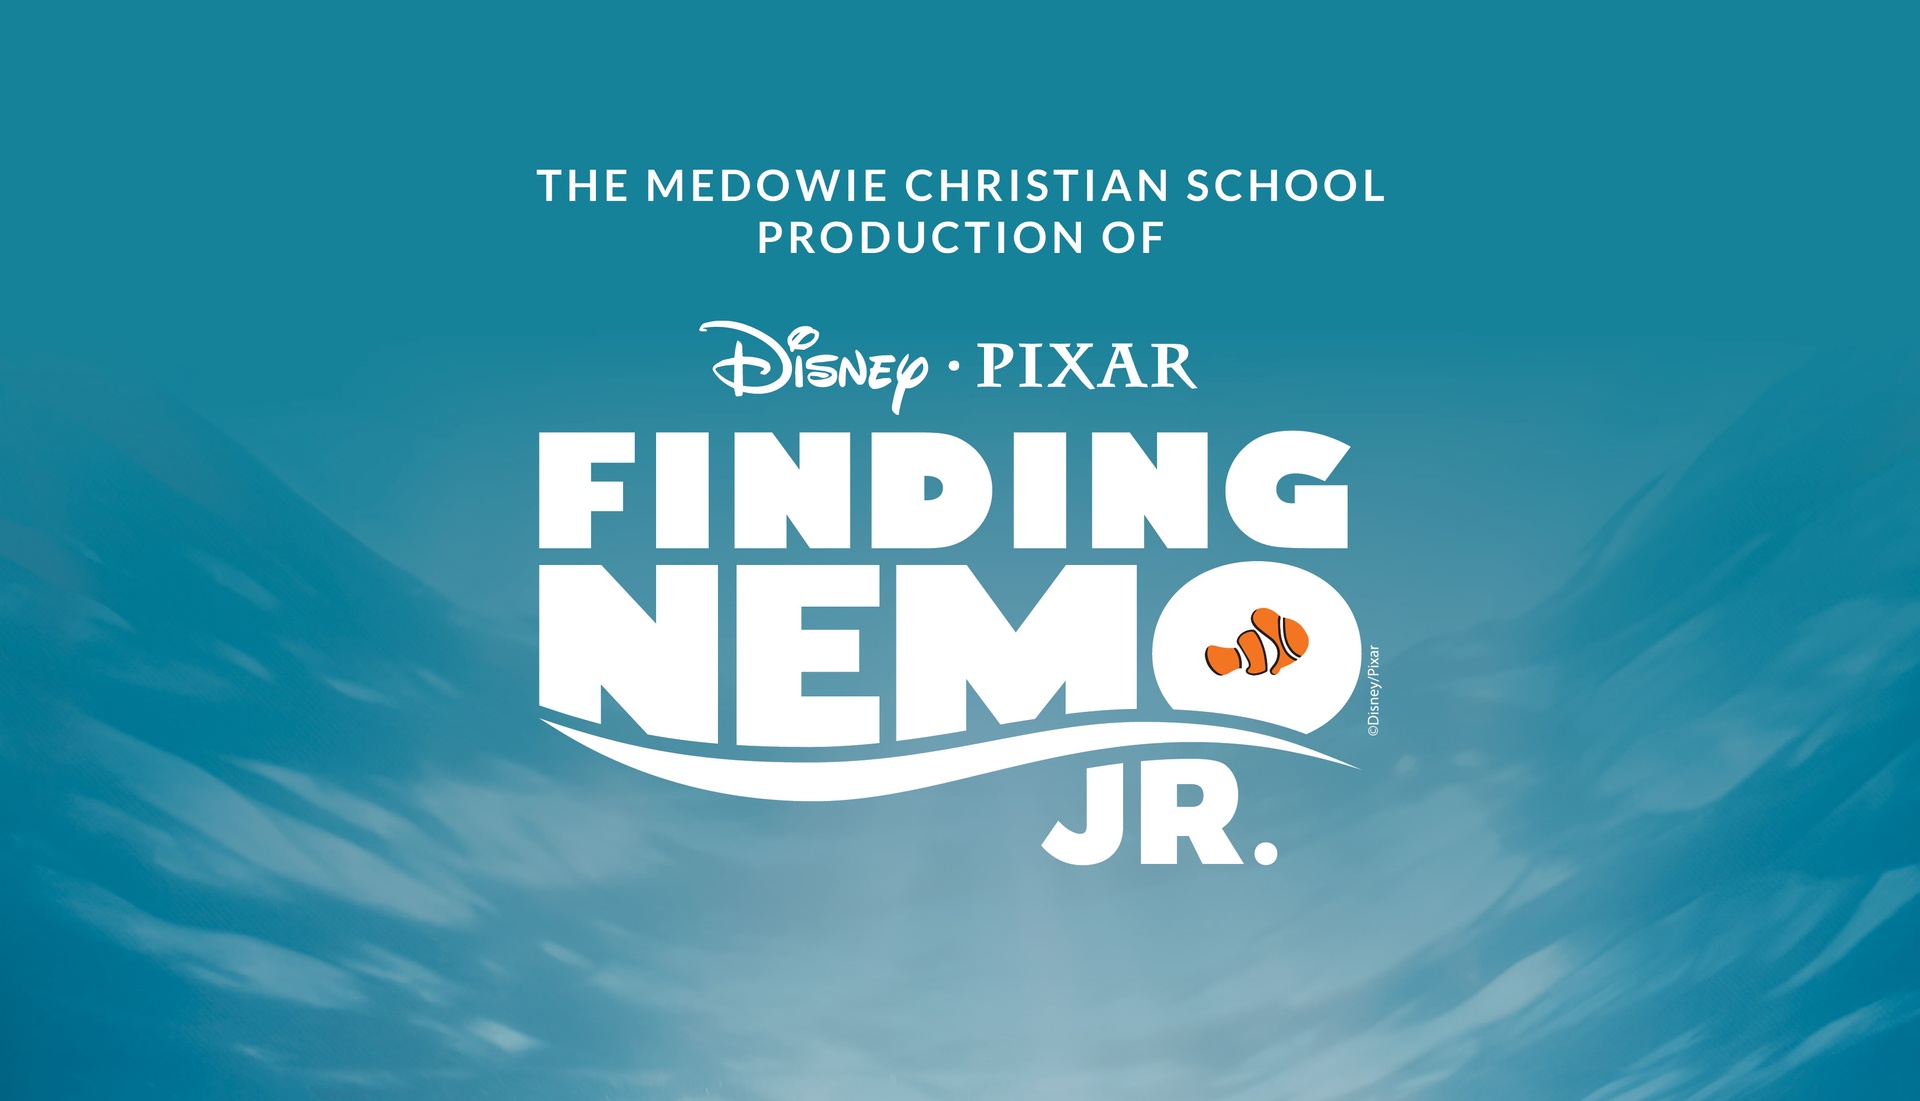 The Medowie Christian School Production of Finding Nemo Jr.